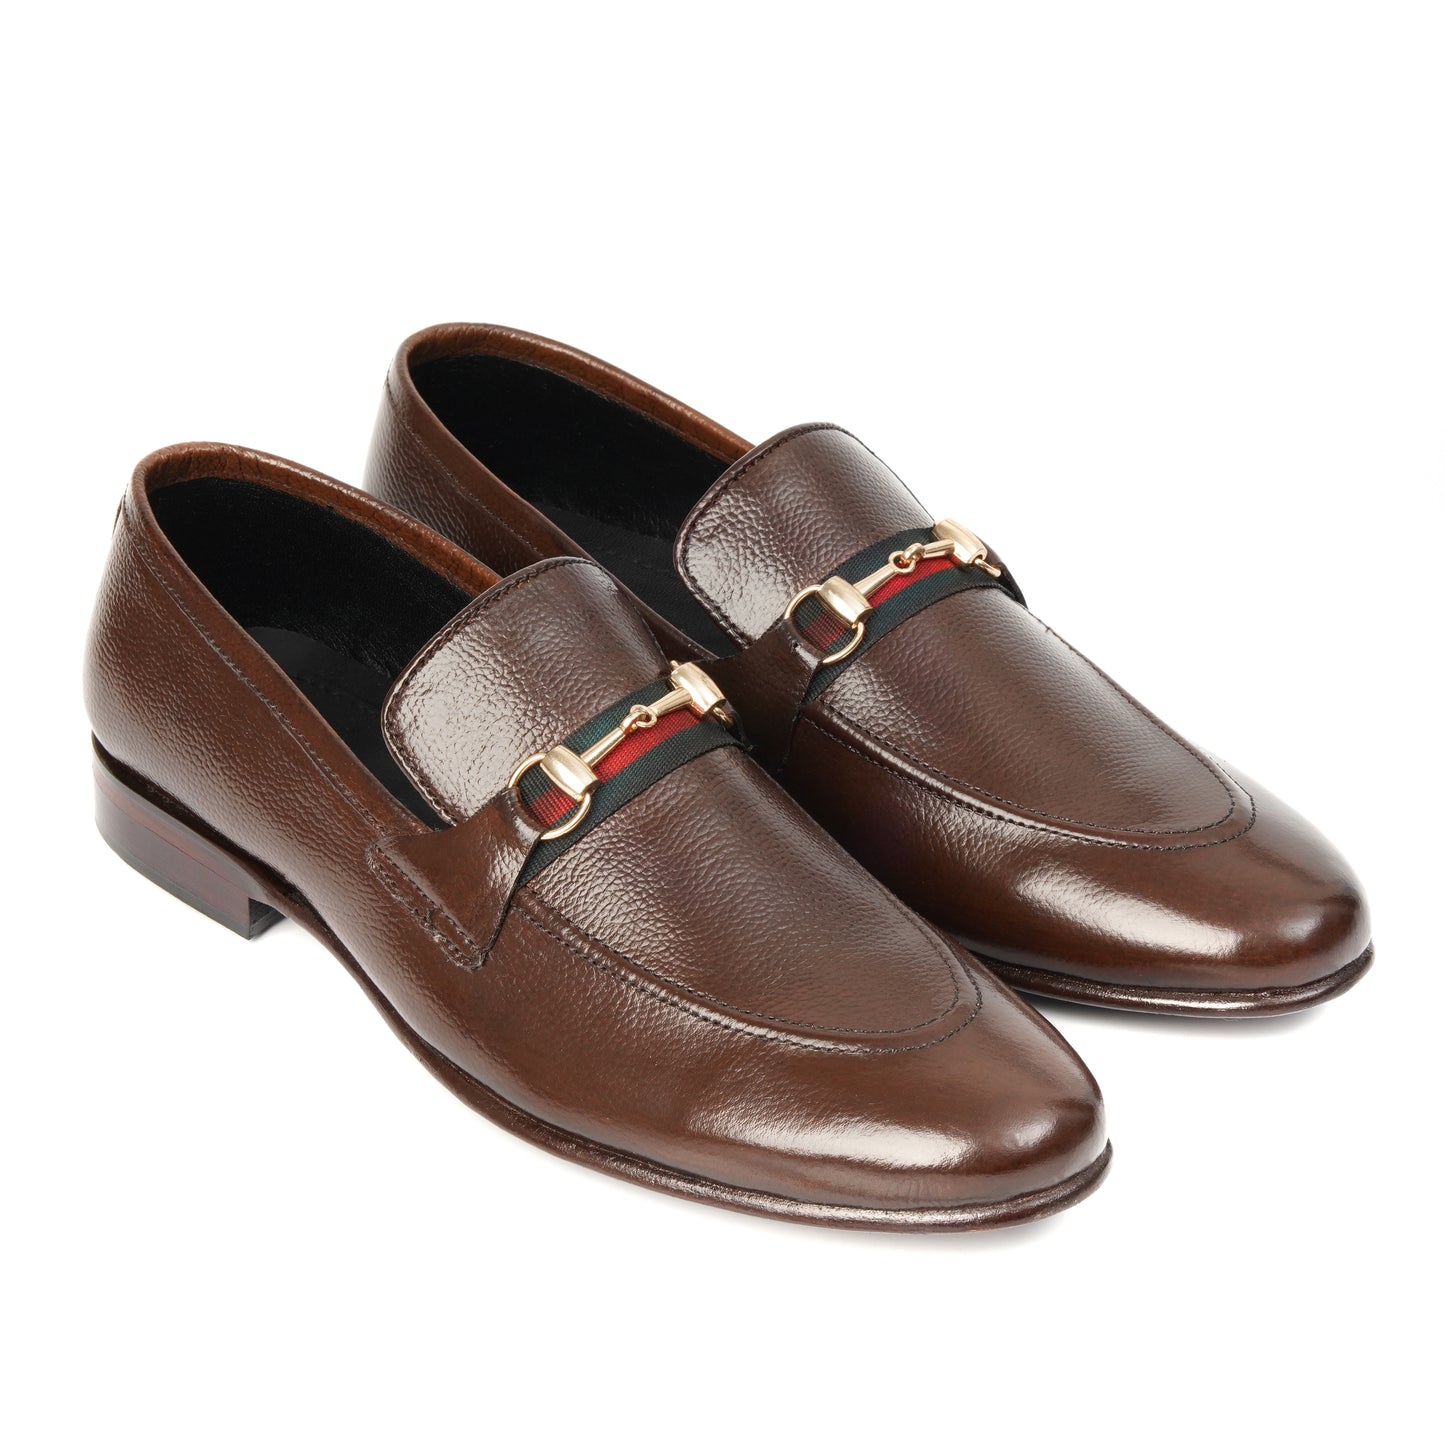 CS006- Brown Gucci Strap Loafers